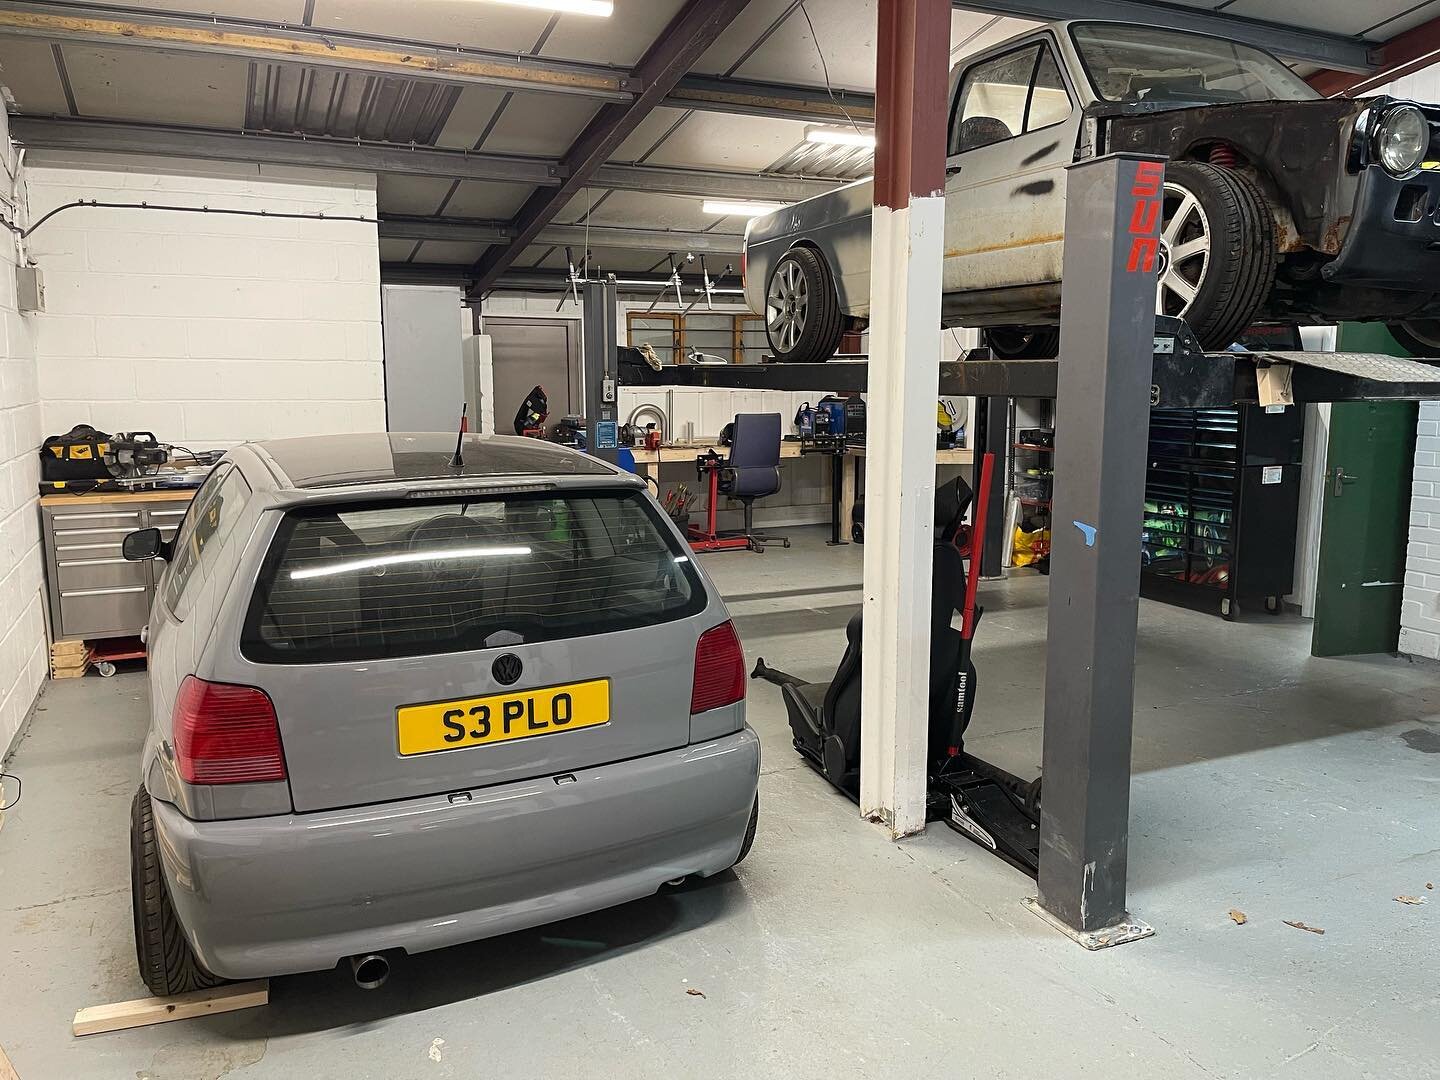 After a busy couple of weeks getting Forward creations HQ ready for work we are almost there 🙌. Time to get busy #vw #vwpolo #vwpolo6n2 #vwlife #vwlove #vwscene #vwdaily #volkswagenpolo #poloawd #haldex #haldexperformance #haldexconversion #vagcars 